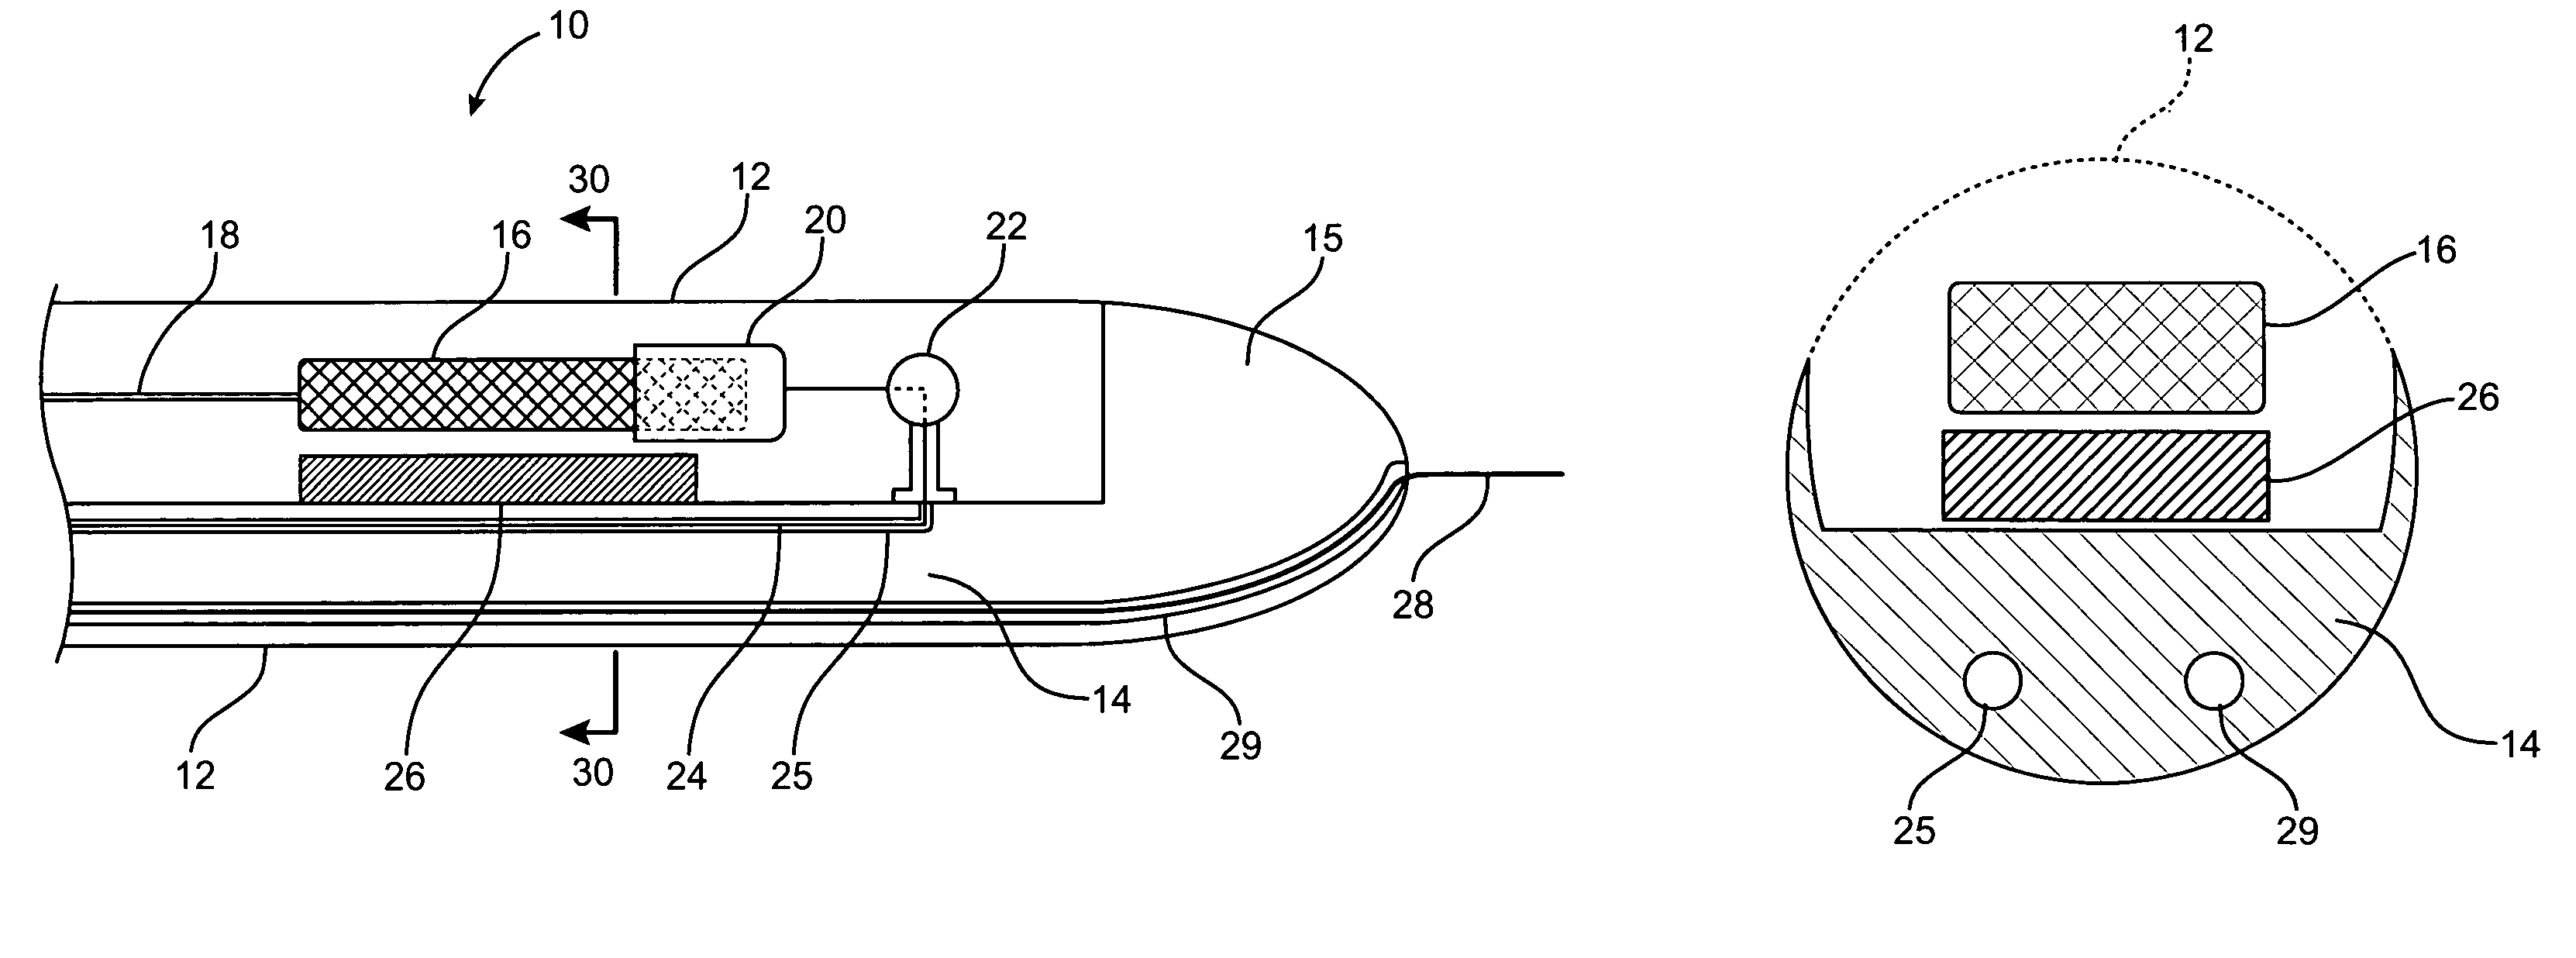 Device for delivering a sensor to the endovascular system and method of use